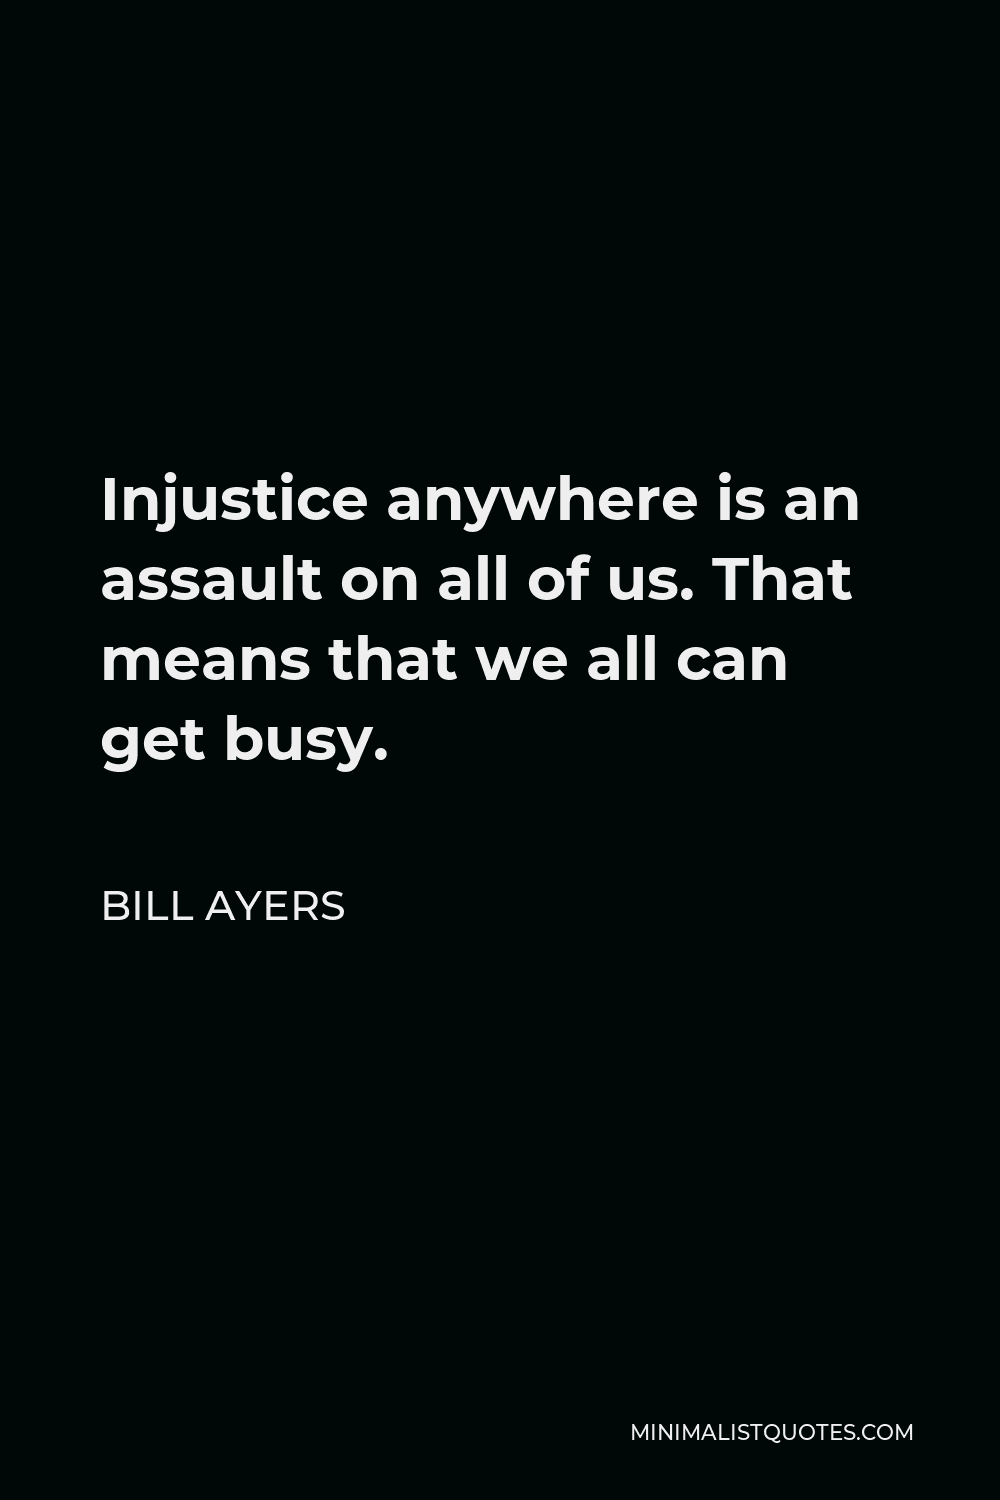 Bill Ayers Quote - Injustice anywhere is an assault on all of us. That means that we all can get busy.